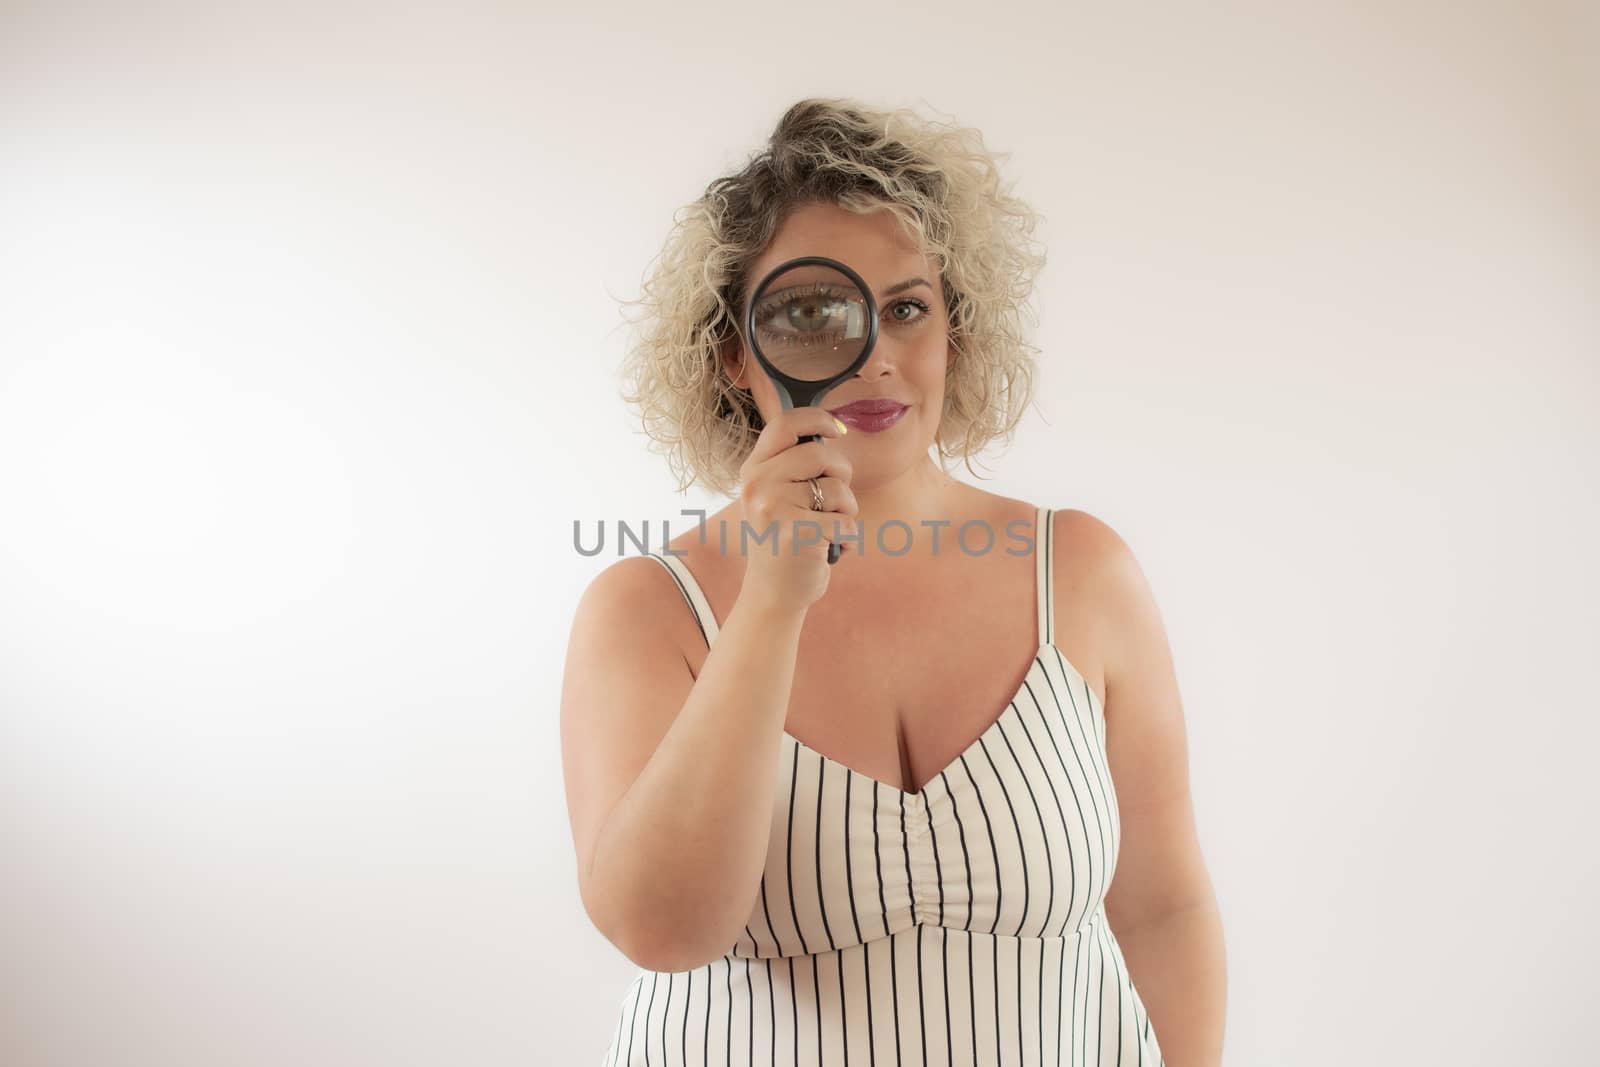 woman, young, adult, blonde, curly, shirt, studio, gesture, okay, work, job, caucasian, ad, person, casual, people, professional, beautiful, joyful, advertisements, happy, smile, summer, arms, funny, gesturing, hand, lucky, fortune, successful, winner, win, piggy, bank, save by lmstudio